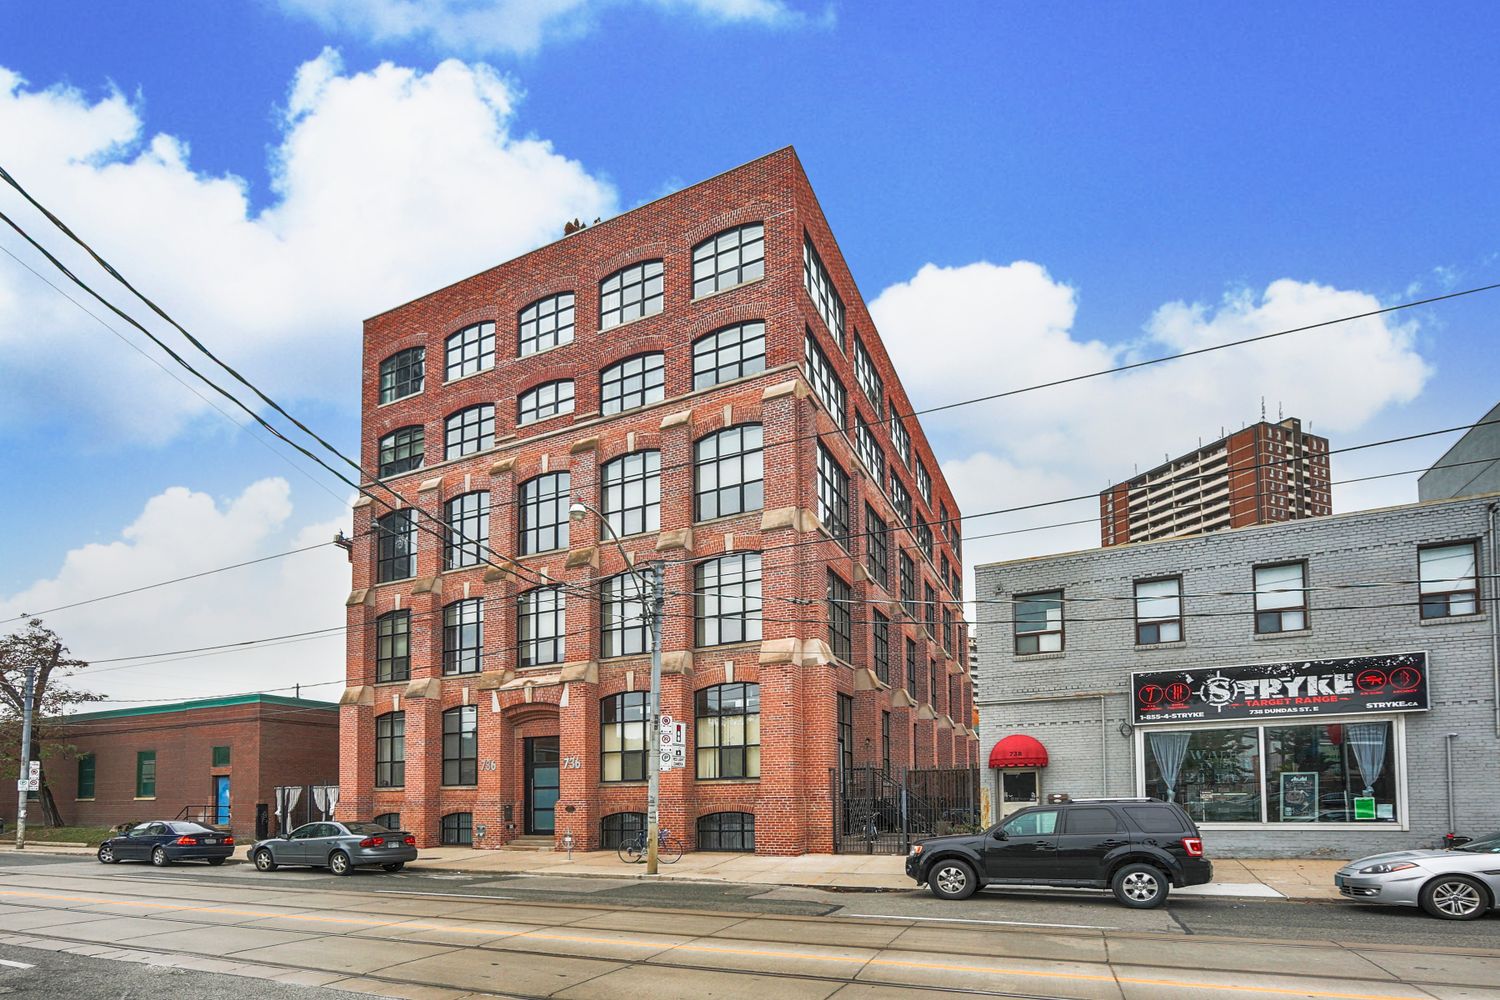 736 Dundas Street E. Tannery Lofts is located in  Downtown, Toronto - image #1 of 4